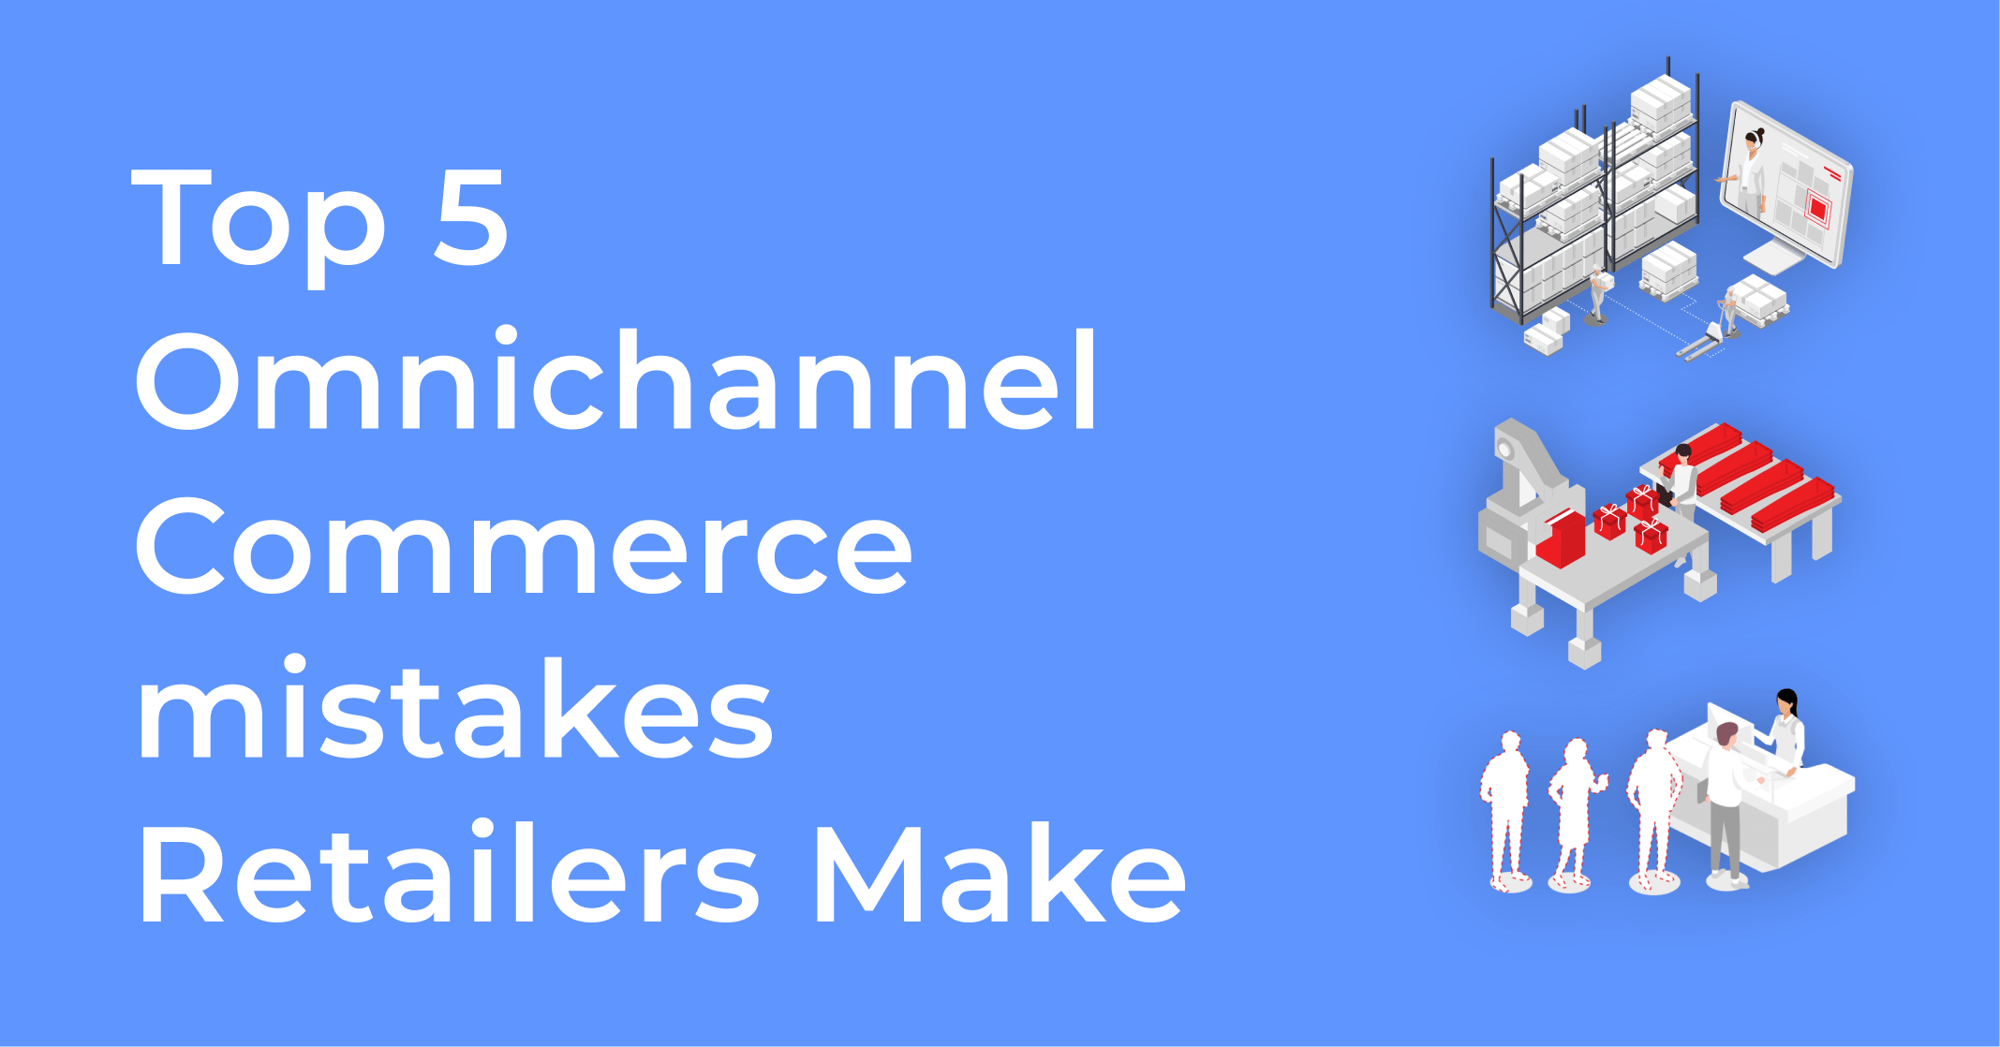 Omnichannel commerce mistakesNW